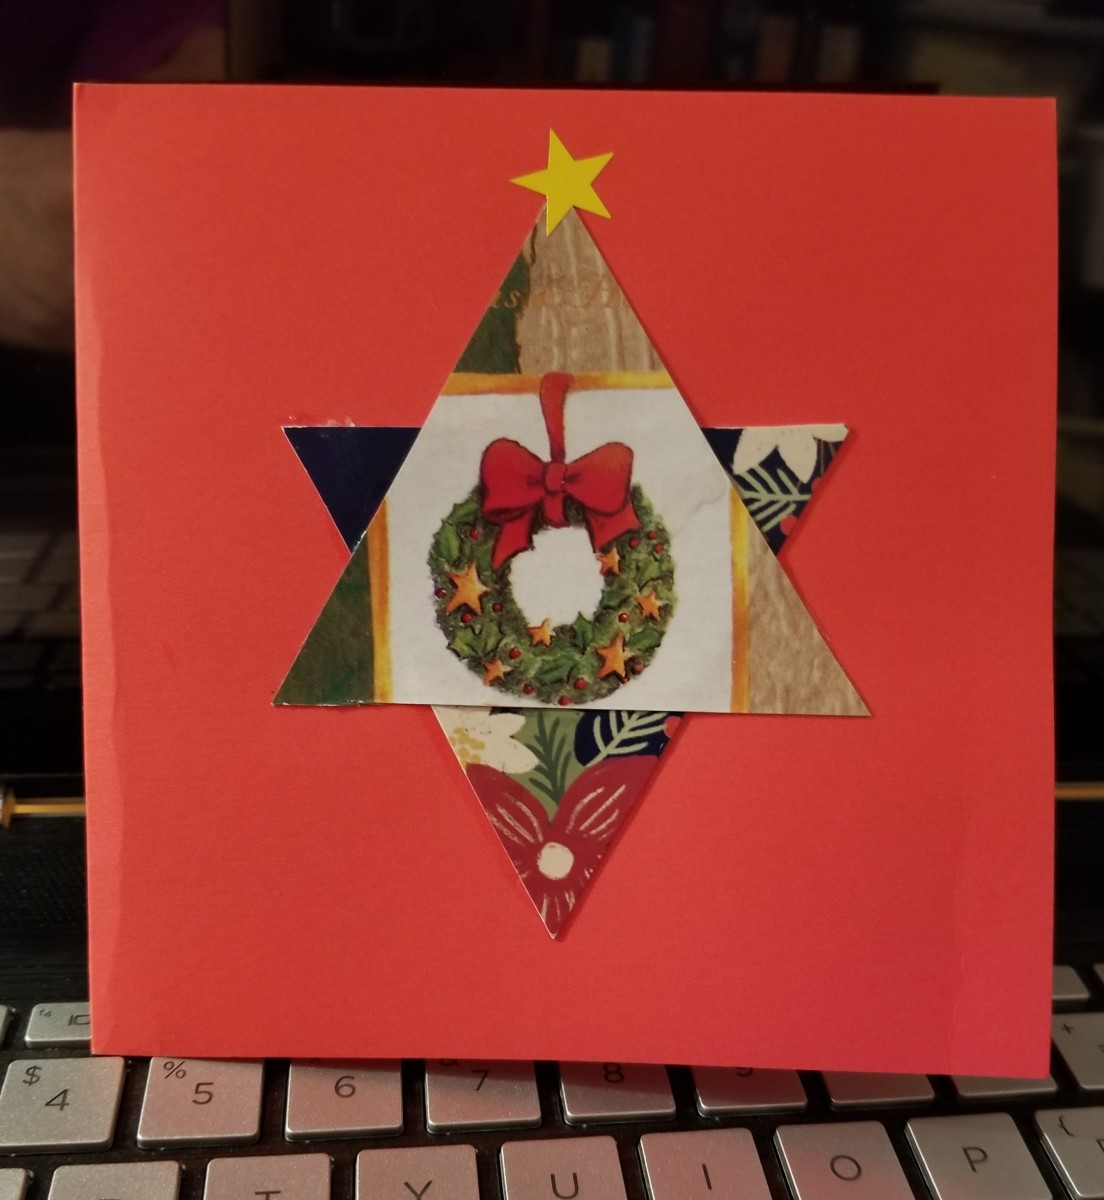 My friend made this simple, yet attractive holiday card. She cut 2 triangles from an old Christmas card and glued them to form a star. Then she added a star sticker at the top. I love it!